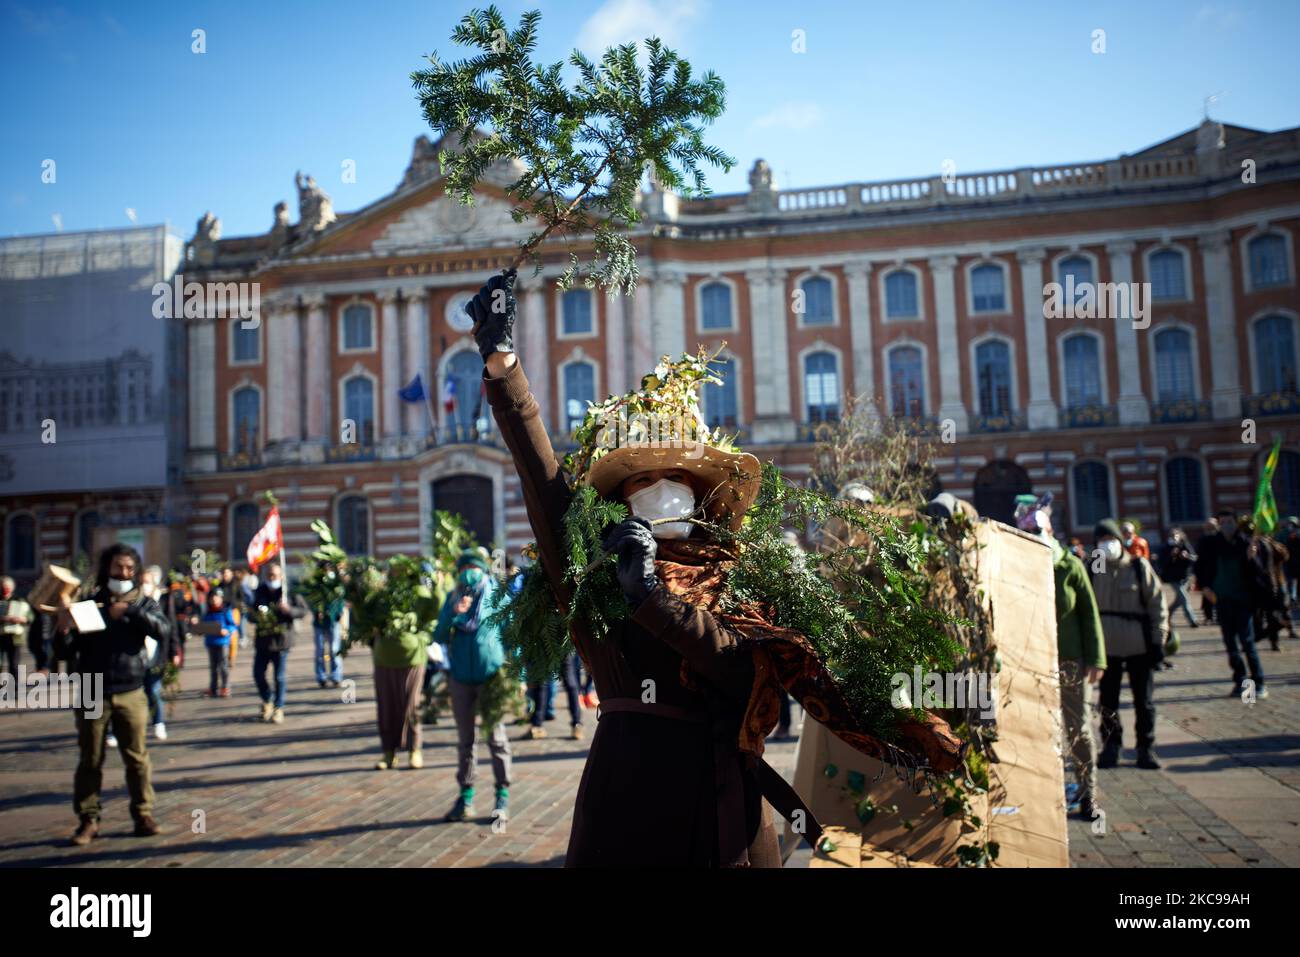 A woman gestures with branchs in front of the townhall of toulouse. Several associations, political parties and people united in a collective 'Touche pas a ma foret' (ie 'Don't touch my forest') called for a die-in in Toulouse in front of the townhall, the Capitole, to symbolize their opposition to a global firm, Florian. The sawmill company Florian wants to build a giant sawmill near the Pyrenean town of Lannemezan. The sawmill is expected to treat nearly 400.000 cubic meters of beech wood each year. For this, the Florian company will need to cut beech trees all over the French Pyrenees. It i Stock Photo